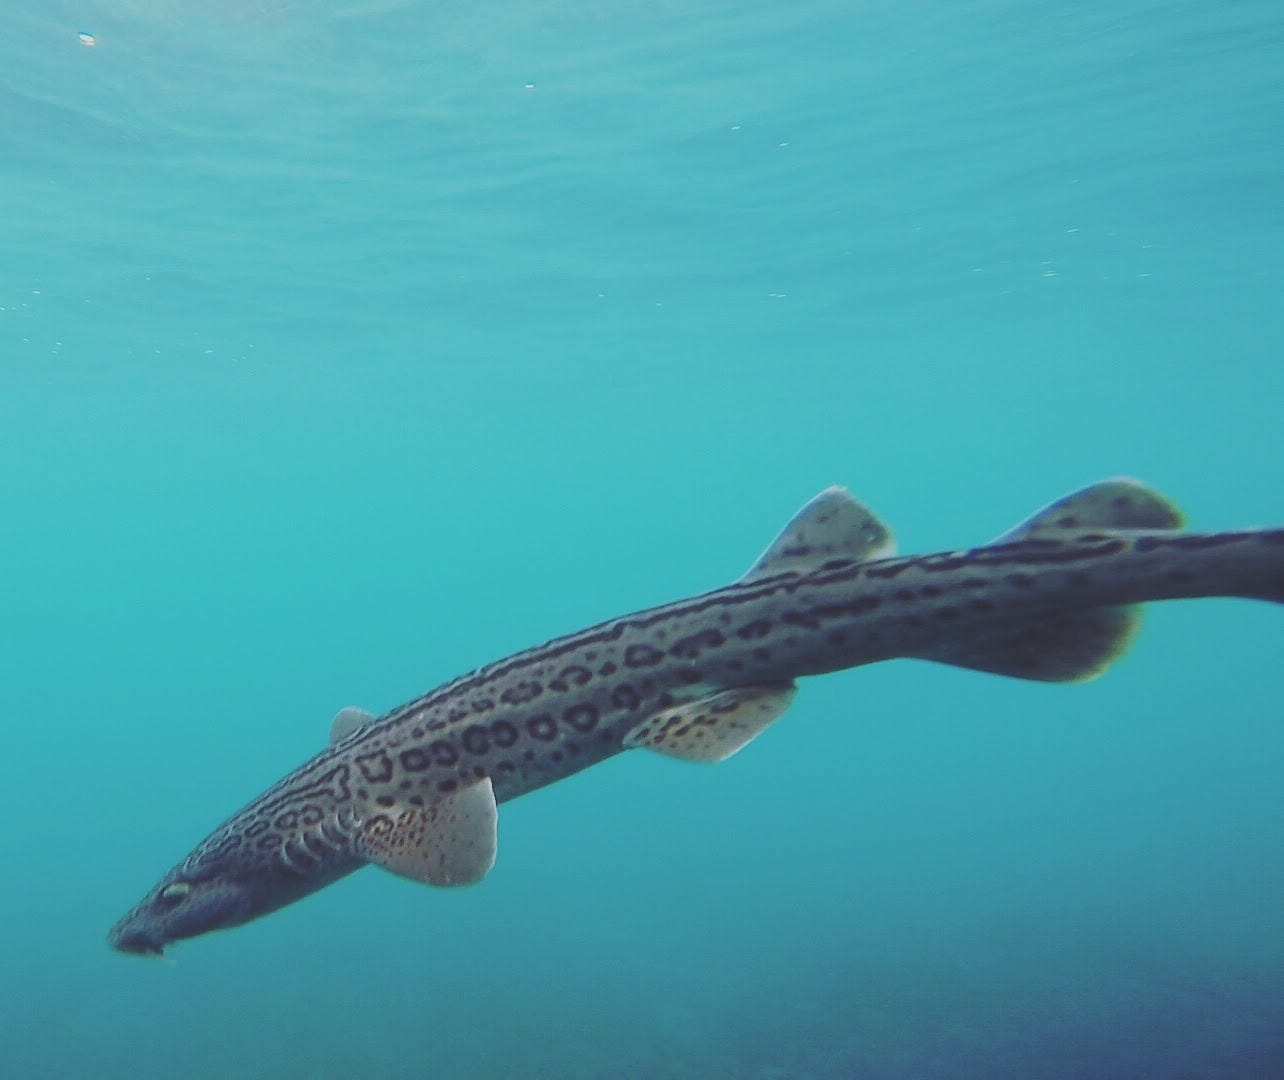 After being tagged during an Oceans Research Institute tag and release project this leopard catshark, an endemic species of Southern African shark, swims off. Photo by Esther Jacobs, Oceans Research Institute.